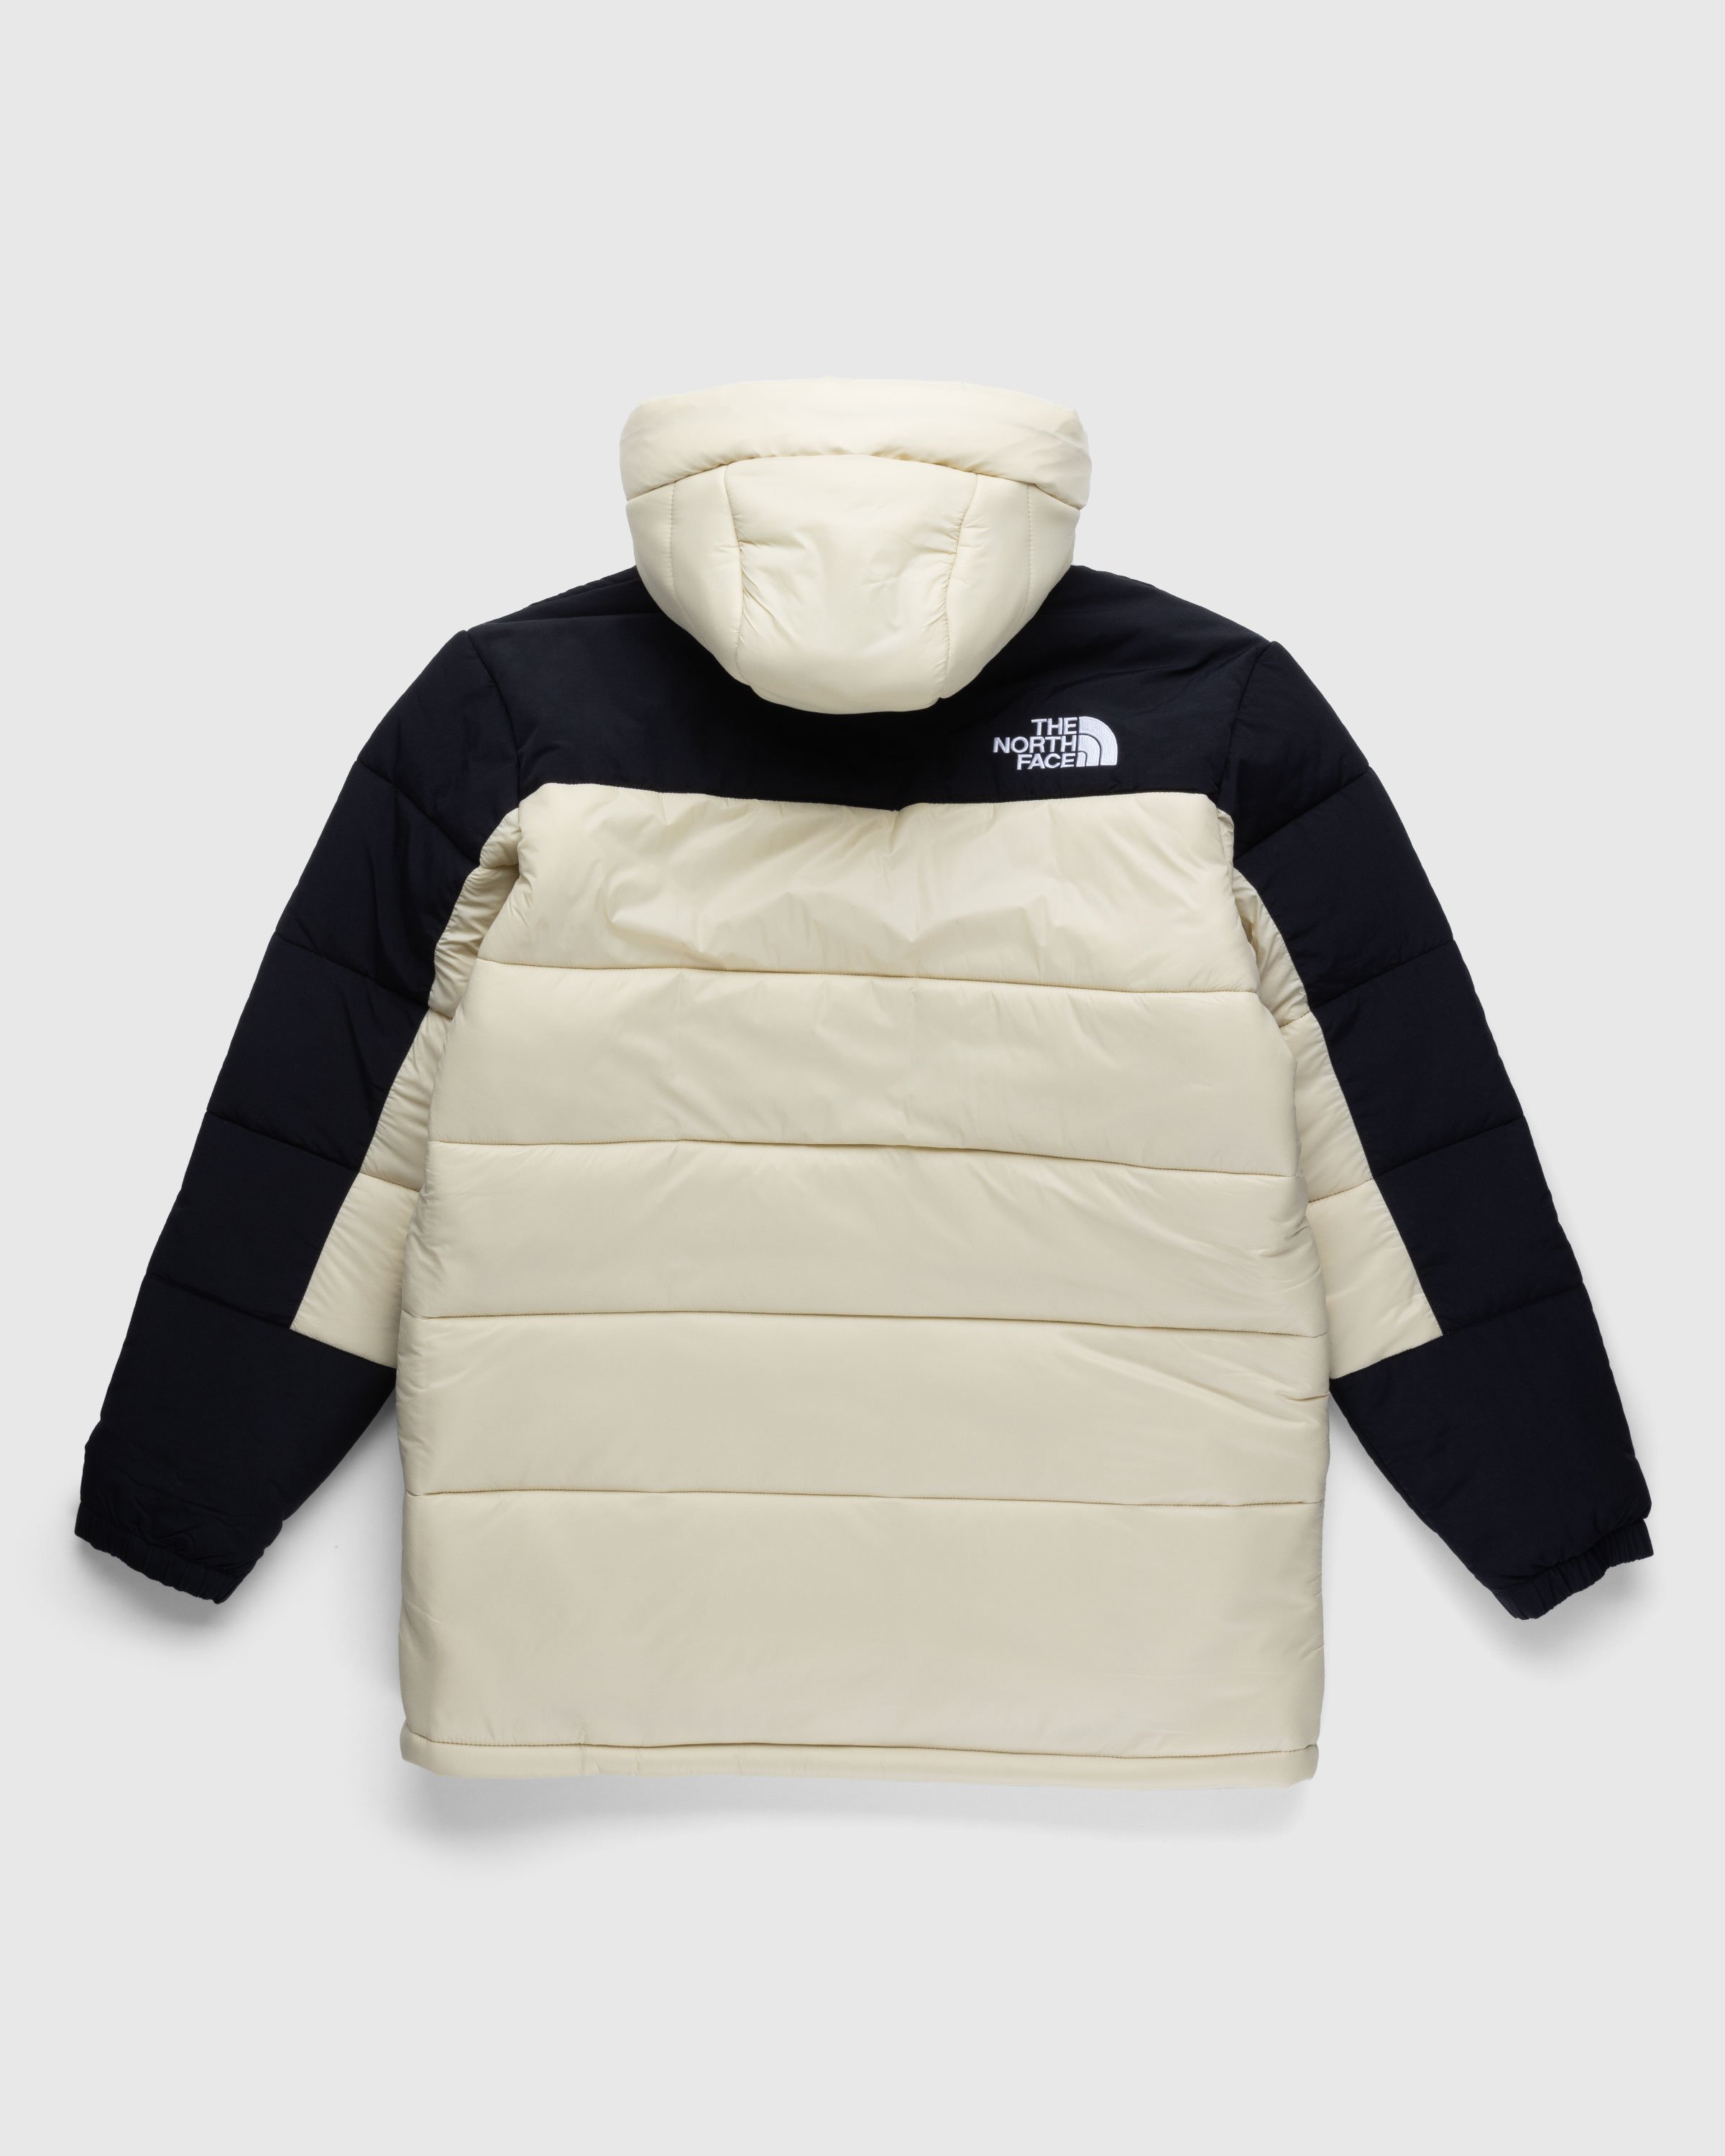 The North Face - Himalayan Insulated Parka Gravel - Clothing - Beige - Image 2